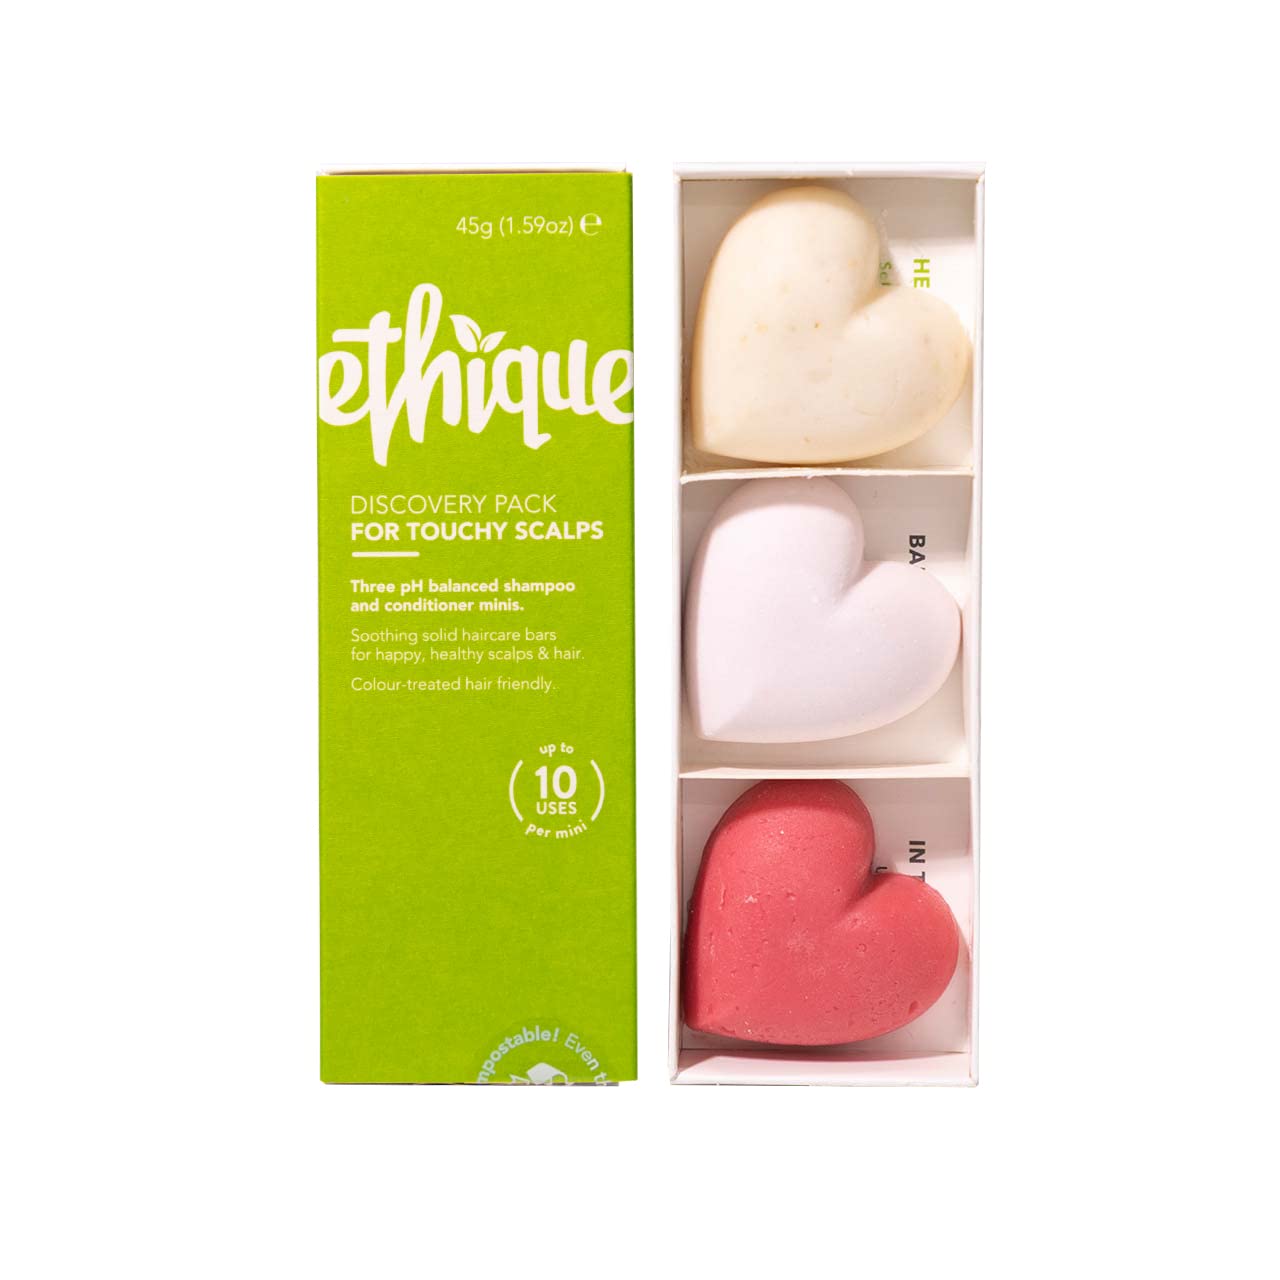 Ethique Discovery Pack for Touchy Scalps - Shampoo & Conditioner - Plastic-Free, Vegan, Cruelty-Free, Eco-Friendly, 3 Travel Bars, 1.59 oz (Pack of 1)